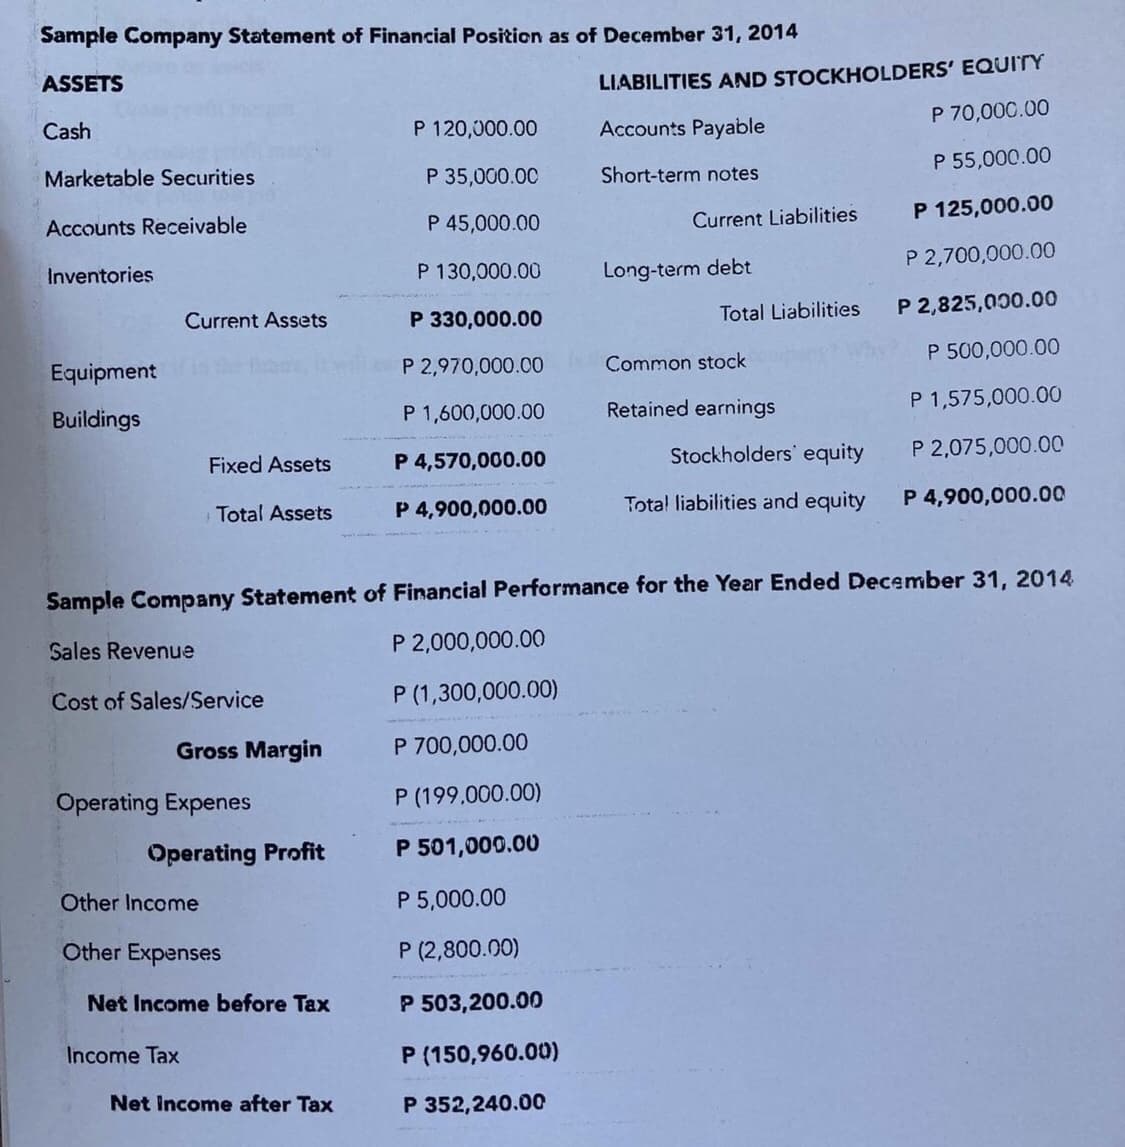 Sample Company Statement of Financial Position as of December 31, 2014
ASSETS
LIABILITIES AND STOCKHOLDERS' EQUITY
Cash
P 120,000.00
Accounts Payable
P 70,000.00
Marketable Securities
P 35,000.00
P 55,000.00
Short-term notes
Accounts Receivable
P 45,000.00
Current Liabilities
P 125,000.00
Inventories
P 130,000.00
Long-term debt
P 2,700,000.00
Current Assets
P 330,000.00
P 2,825,000.00
Total Liabilities
Equipment
P 2,970,000.00
Common stock
P 500,000.00
Buildings
P 1,600,000.00
Retained earnings
P 1,575,000.00
Fixed Assets
P 4,570,000.00
Stockholders' equity
P 2,075,000.00
Total Assets
P 4,900,000.00
Total liabilities and equity
P 4,900,000.00
Sample Company Statement of Financial Performance for the Year Ended December 31, 2014
Sales Revenue
P 2,000,000.00
Cost of Sales/Service
P (1,300,000.00)
Gross Margin
P 700,000.00
Operating Expenes
P (199.000.00)
Operating Profit
P 501,000.00
Other Income
P 5,000.00
Other Expenses
P (2,800.00)
Net Income before Tax
P 503,200.00
Income Tax
P (150,960.00)
Net Income after Tax
P 352,240.00
